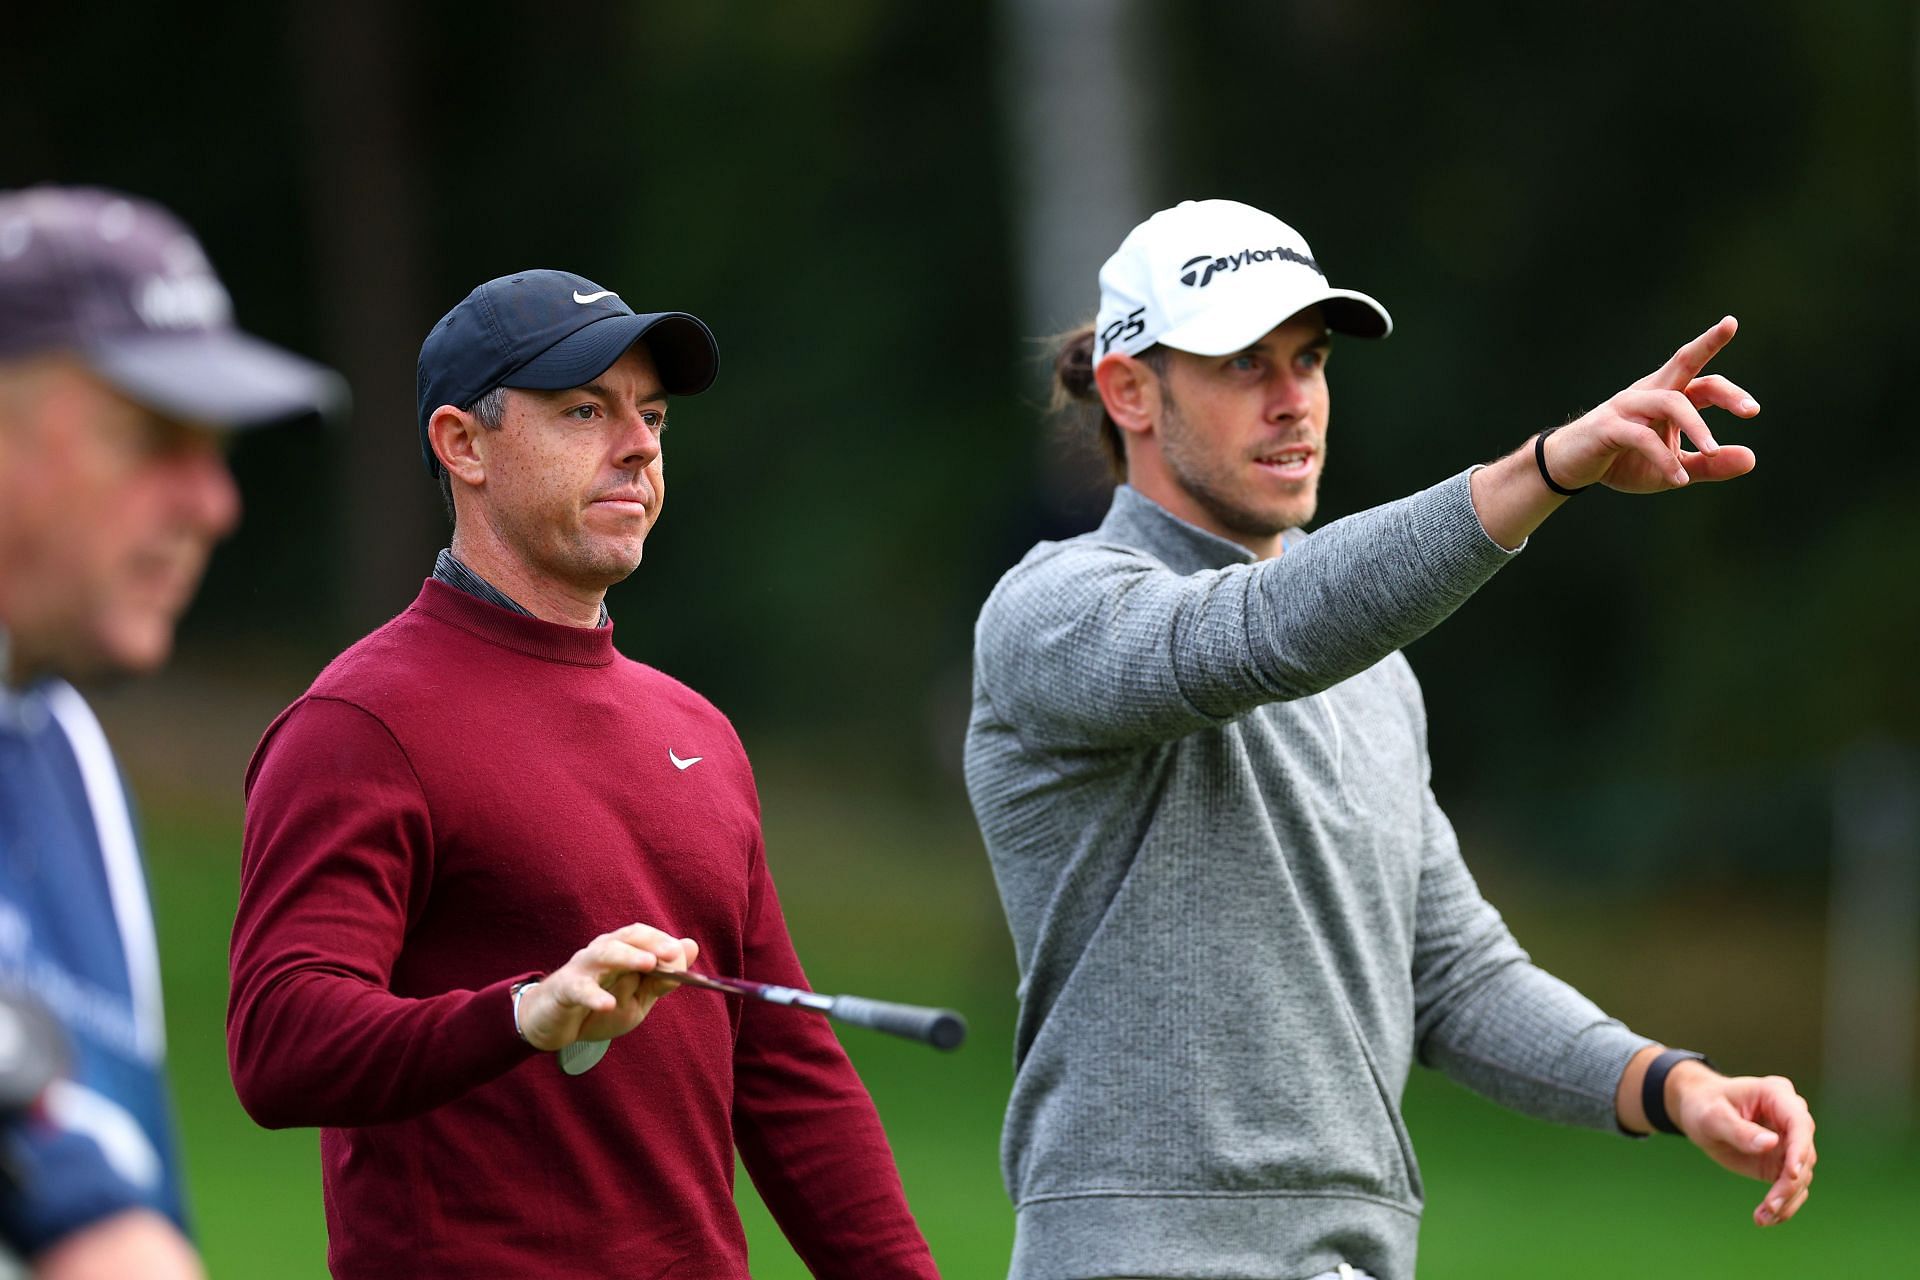 Rory McIlroy interacts with Gareth Bale during the Pro-Am prior to the BMW PGA Championship 2023